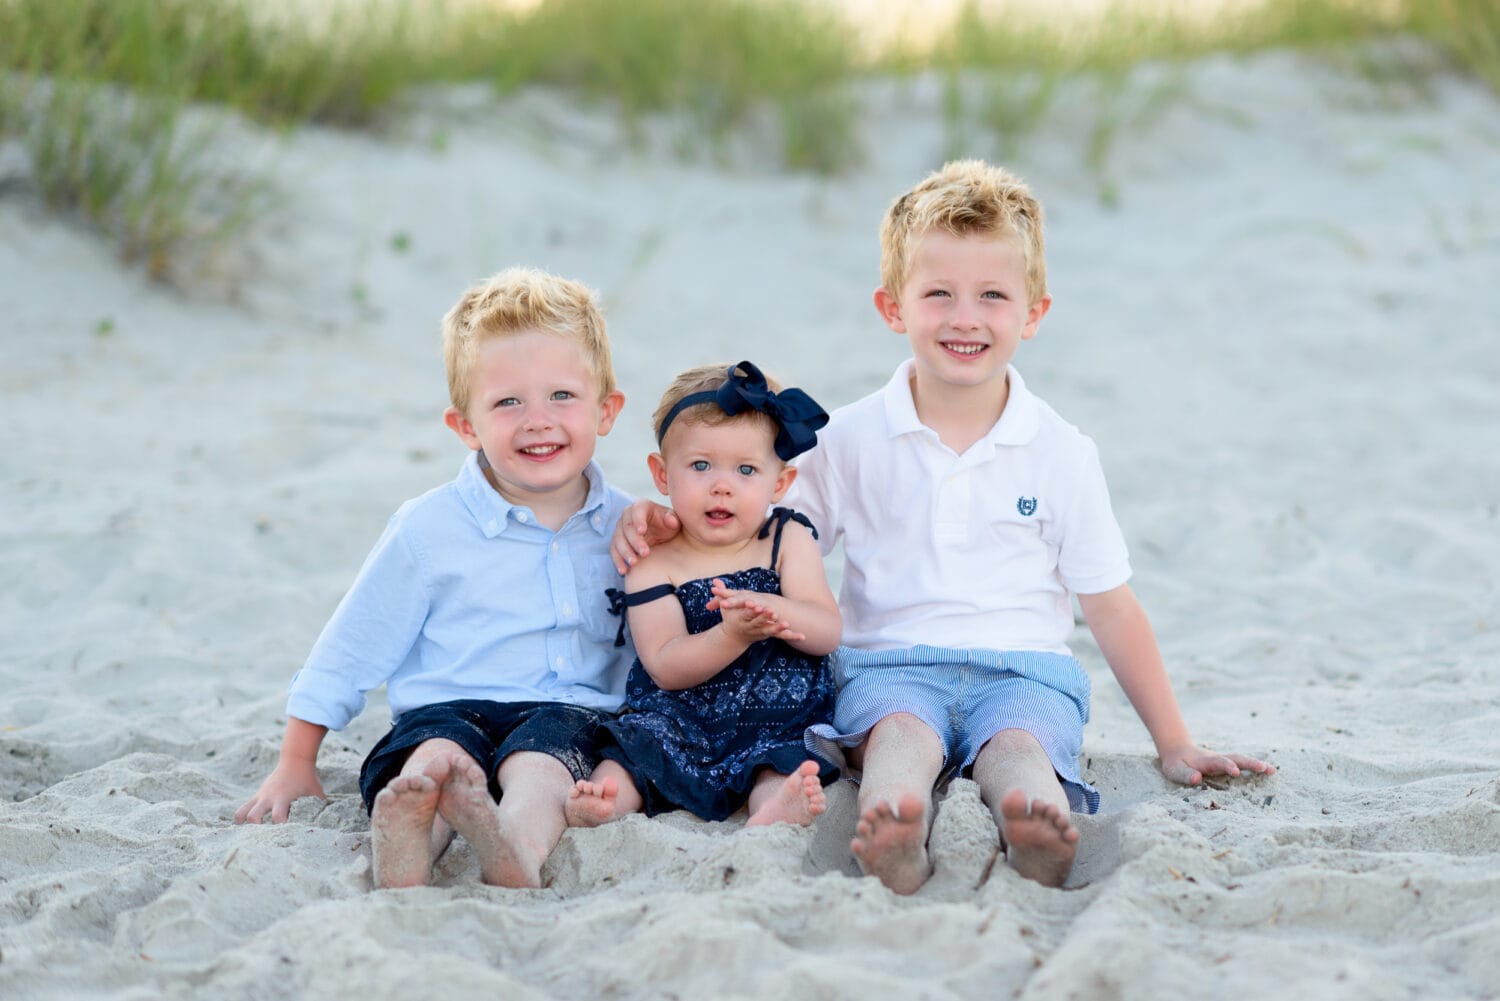 Getting these three to look at the camera at the same time was almost impossible - Myrtle Beach State Park